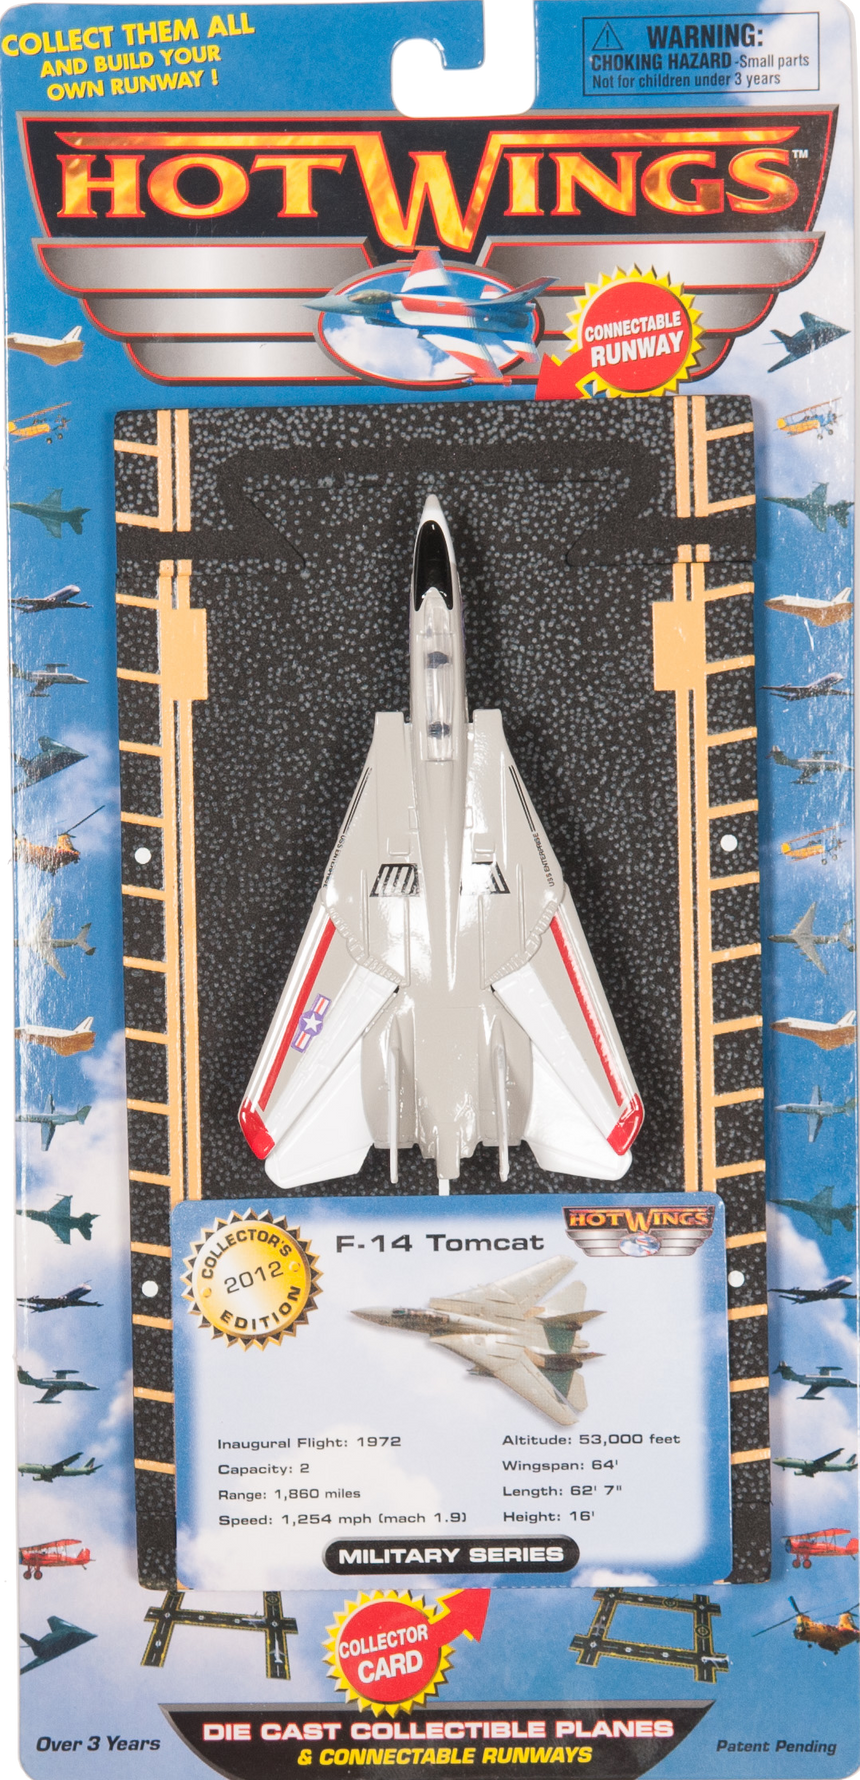 F-14 Tomcat (with military markings) in Damaged Packaging